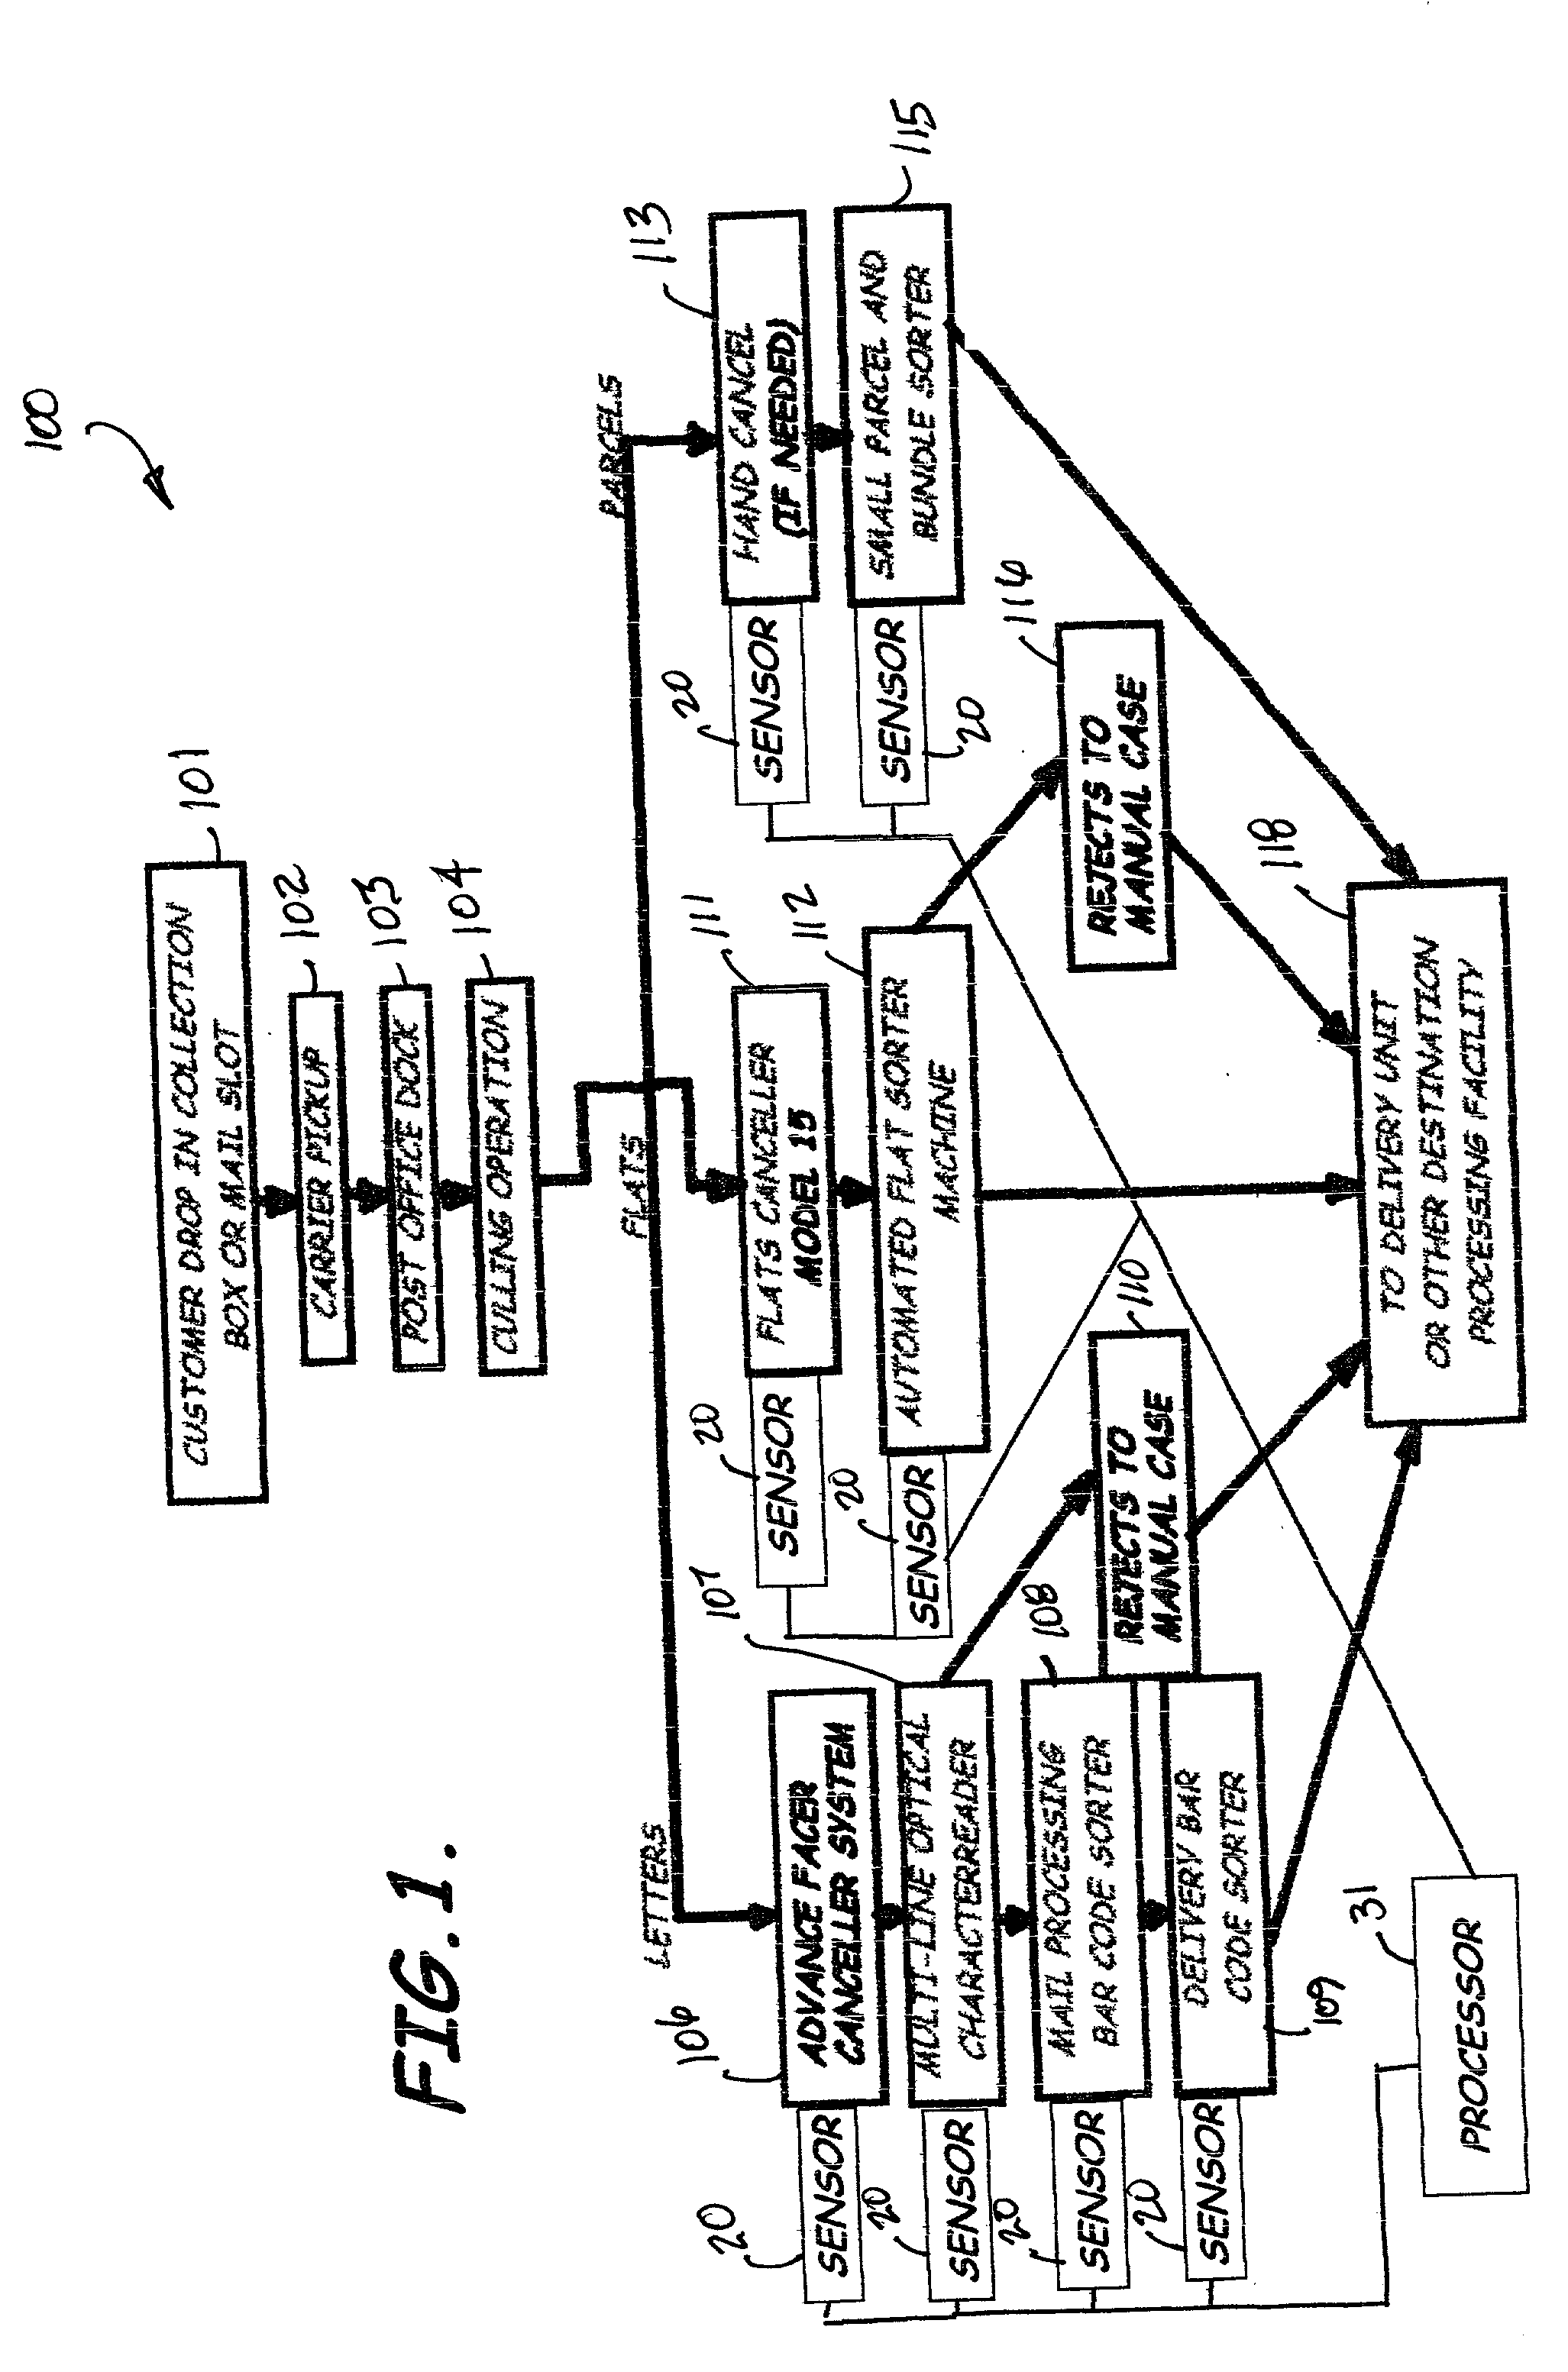 System and methods for detecting harmful agents within contents of mail